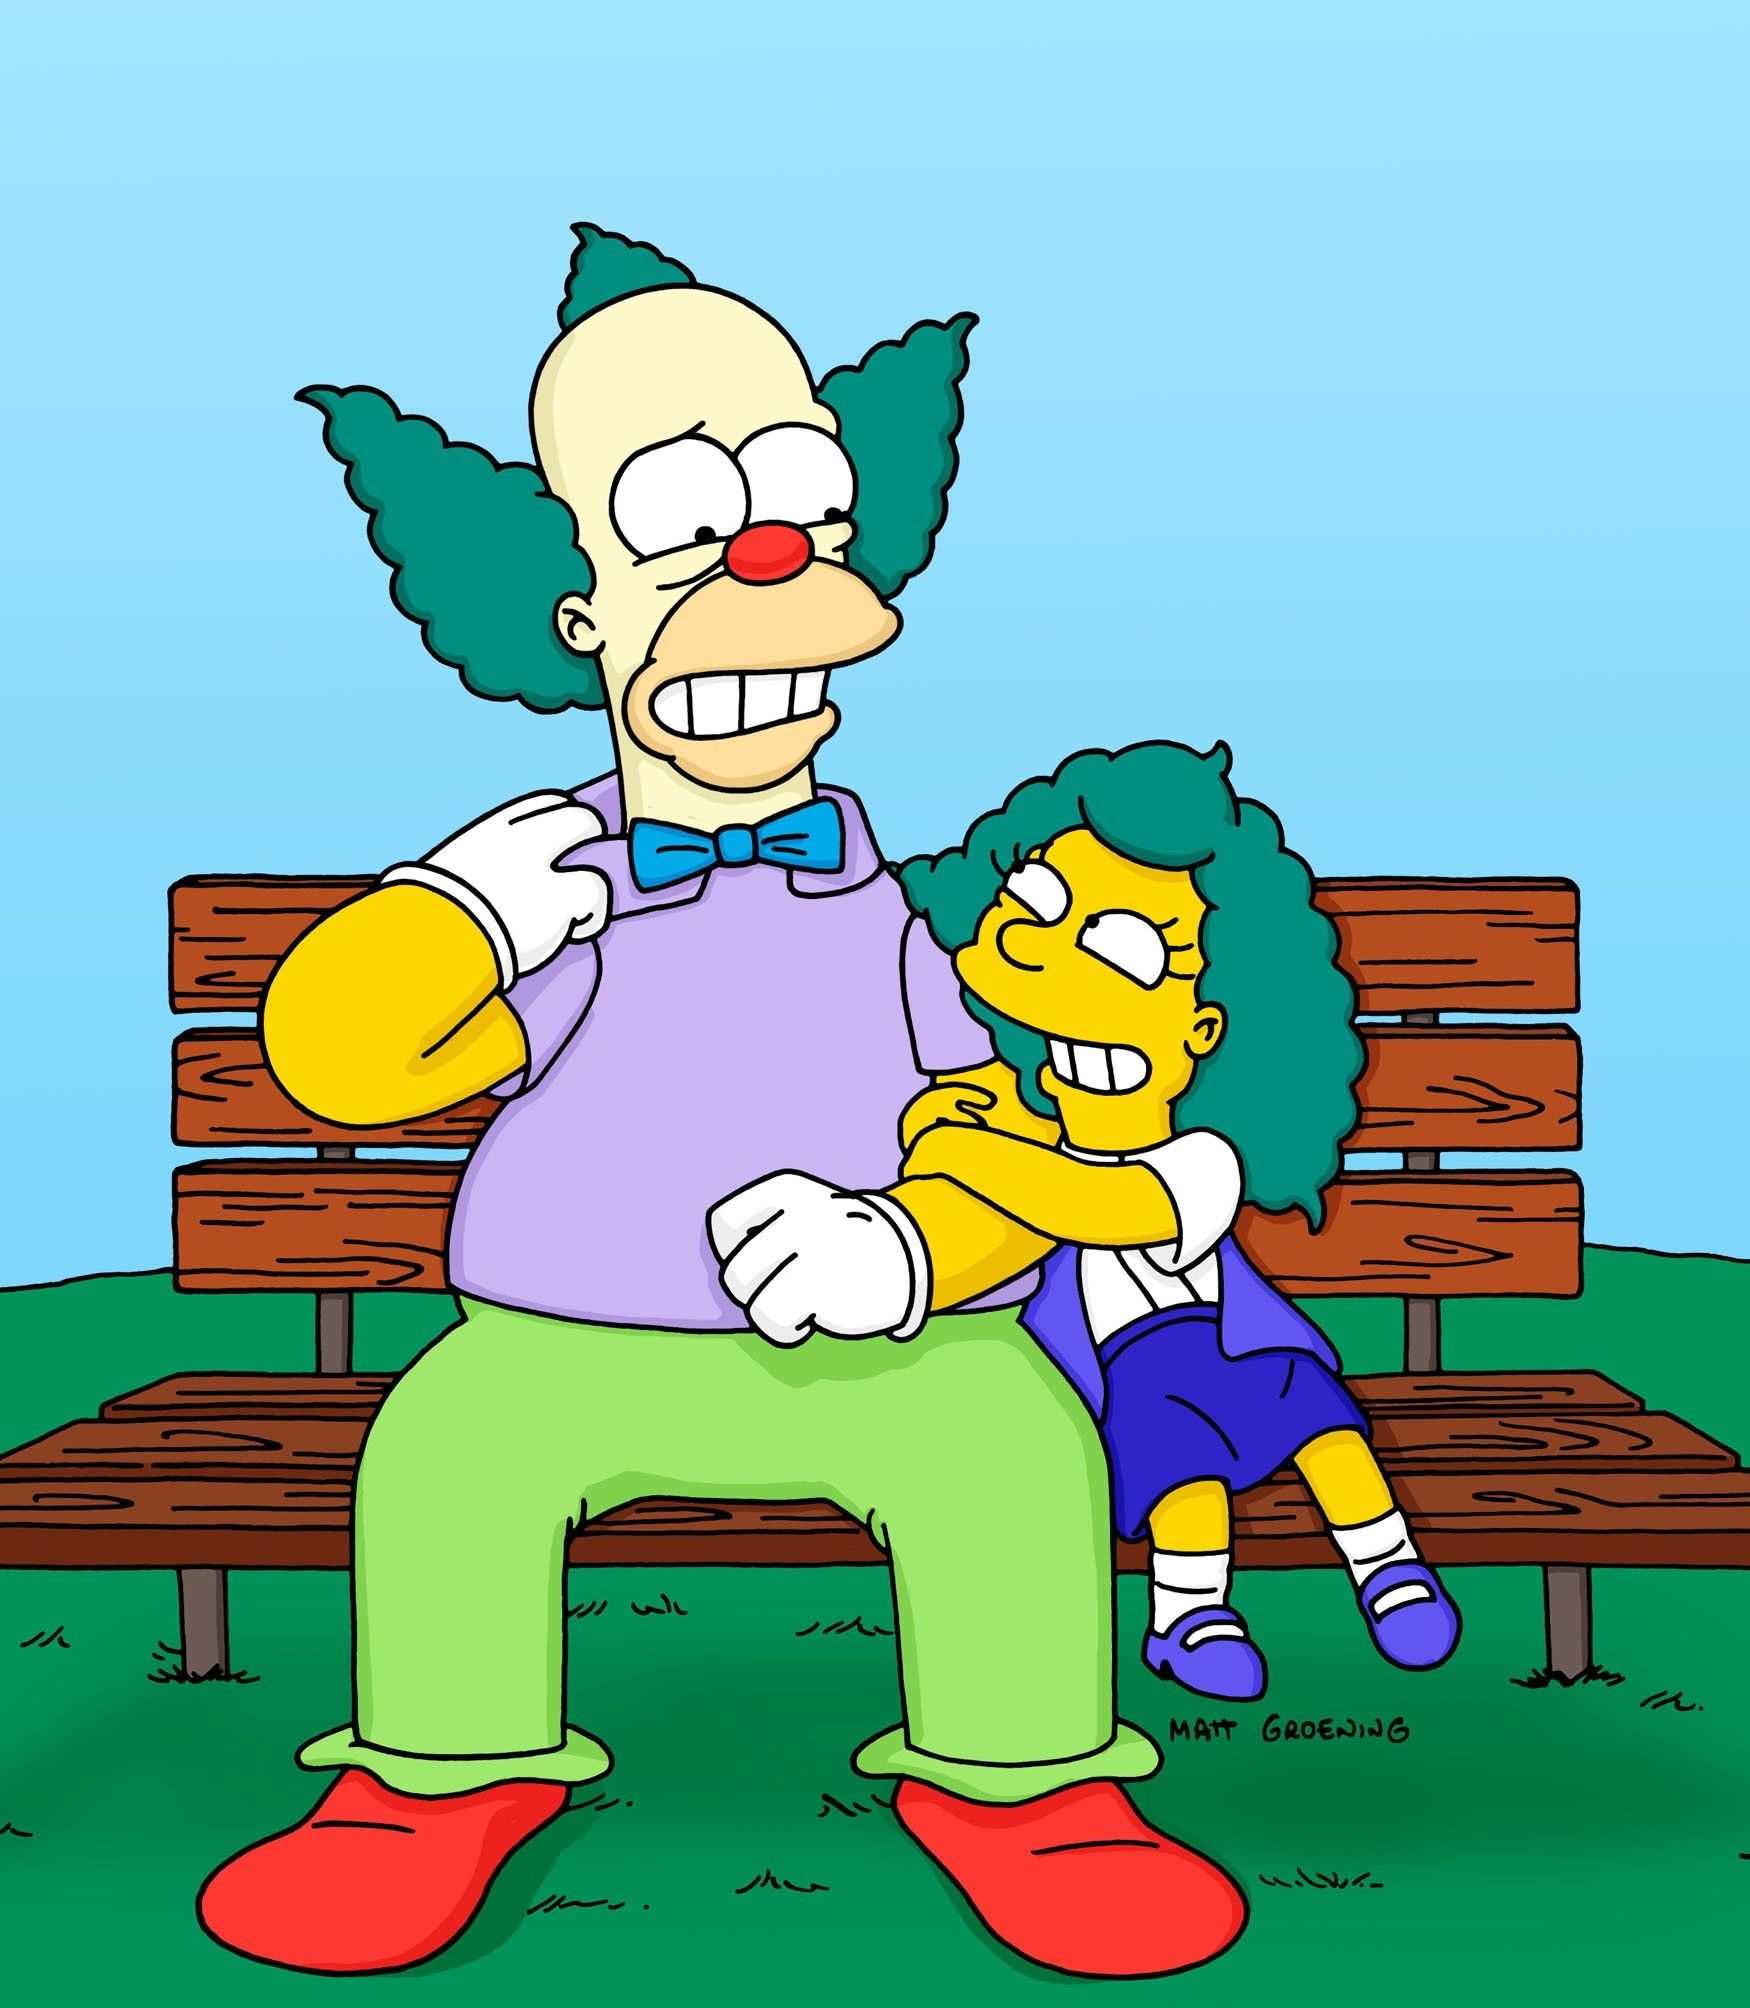 Krusty the Clown - Wikisimpsons, the Simpsons Wiki1750 x 2008